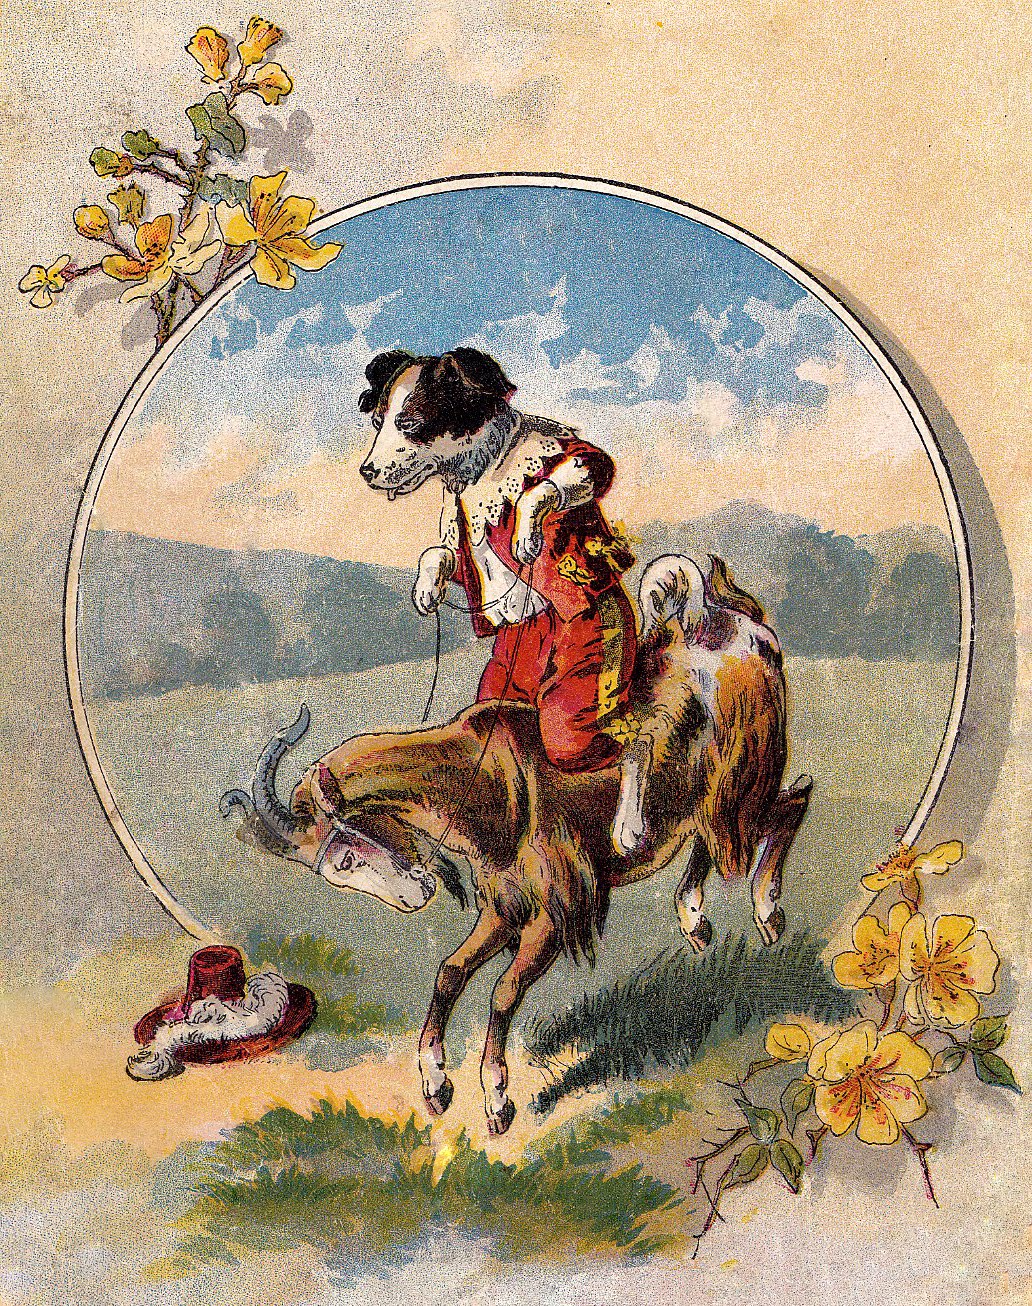 Vintage Image - Cute Dog rides Goat - The Graphics Fairy1032 x 1306